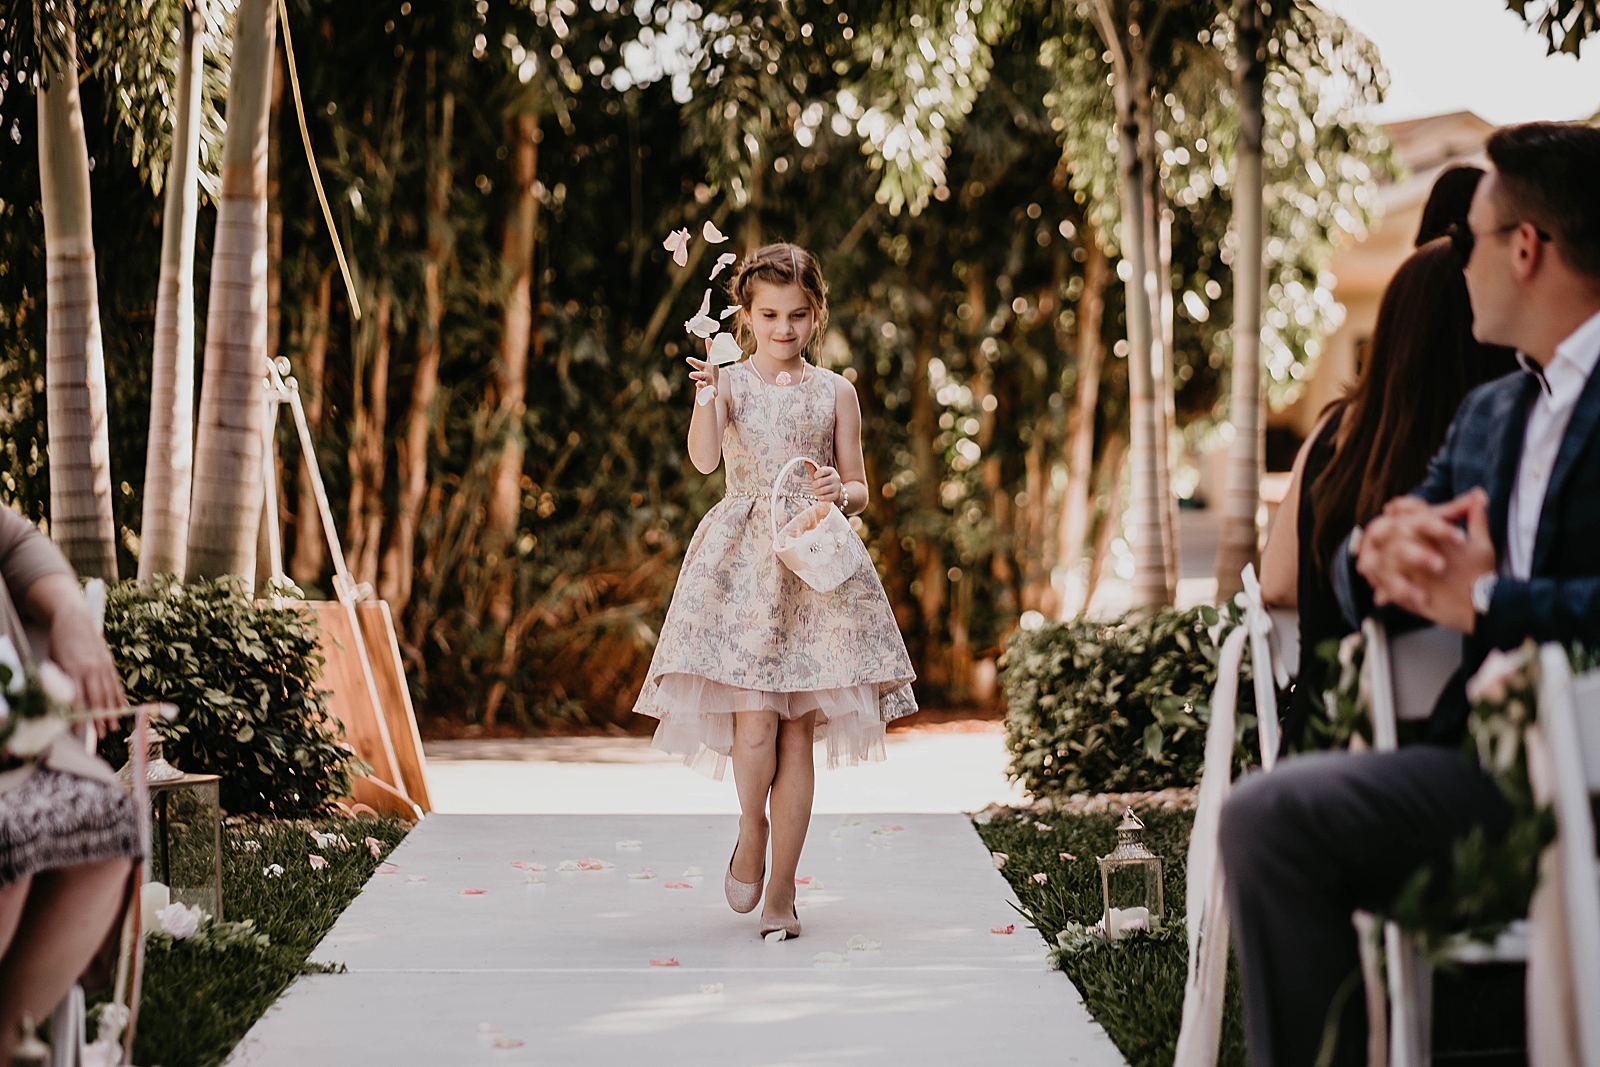 Flower Girl entering Ceremony with petals